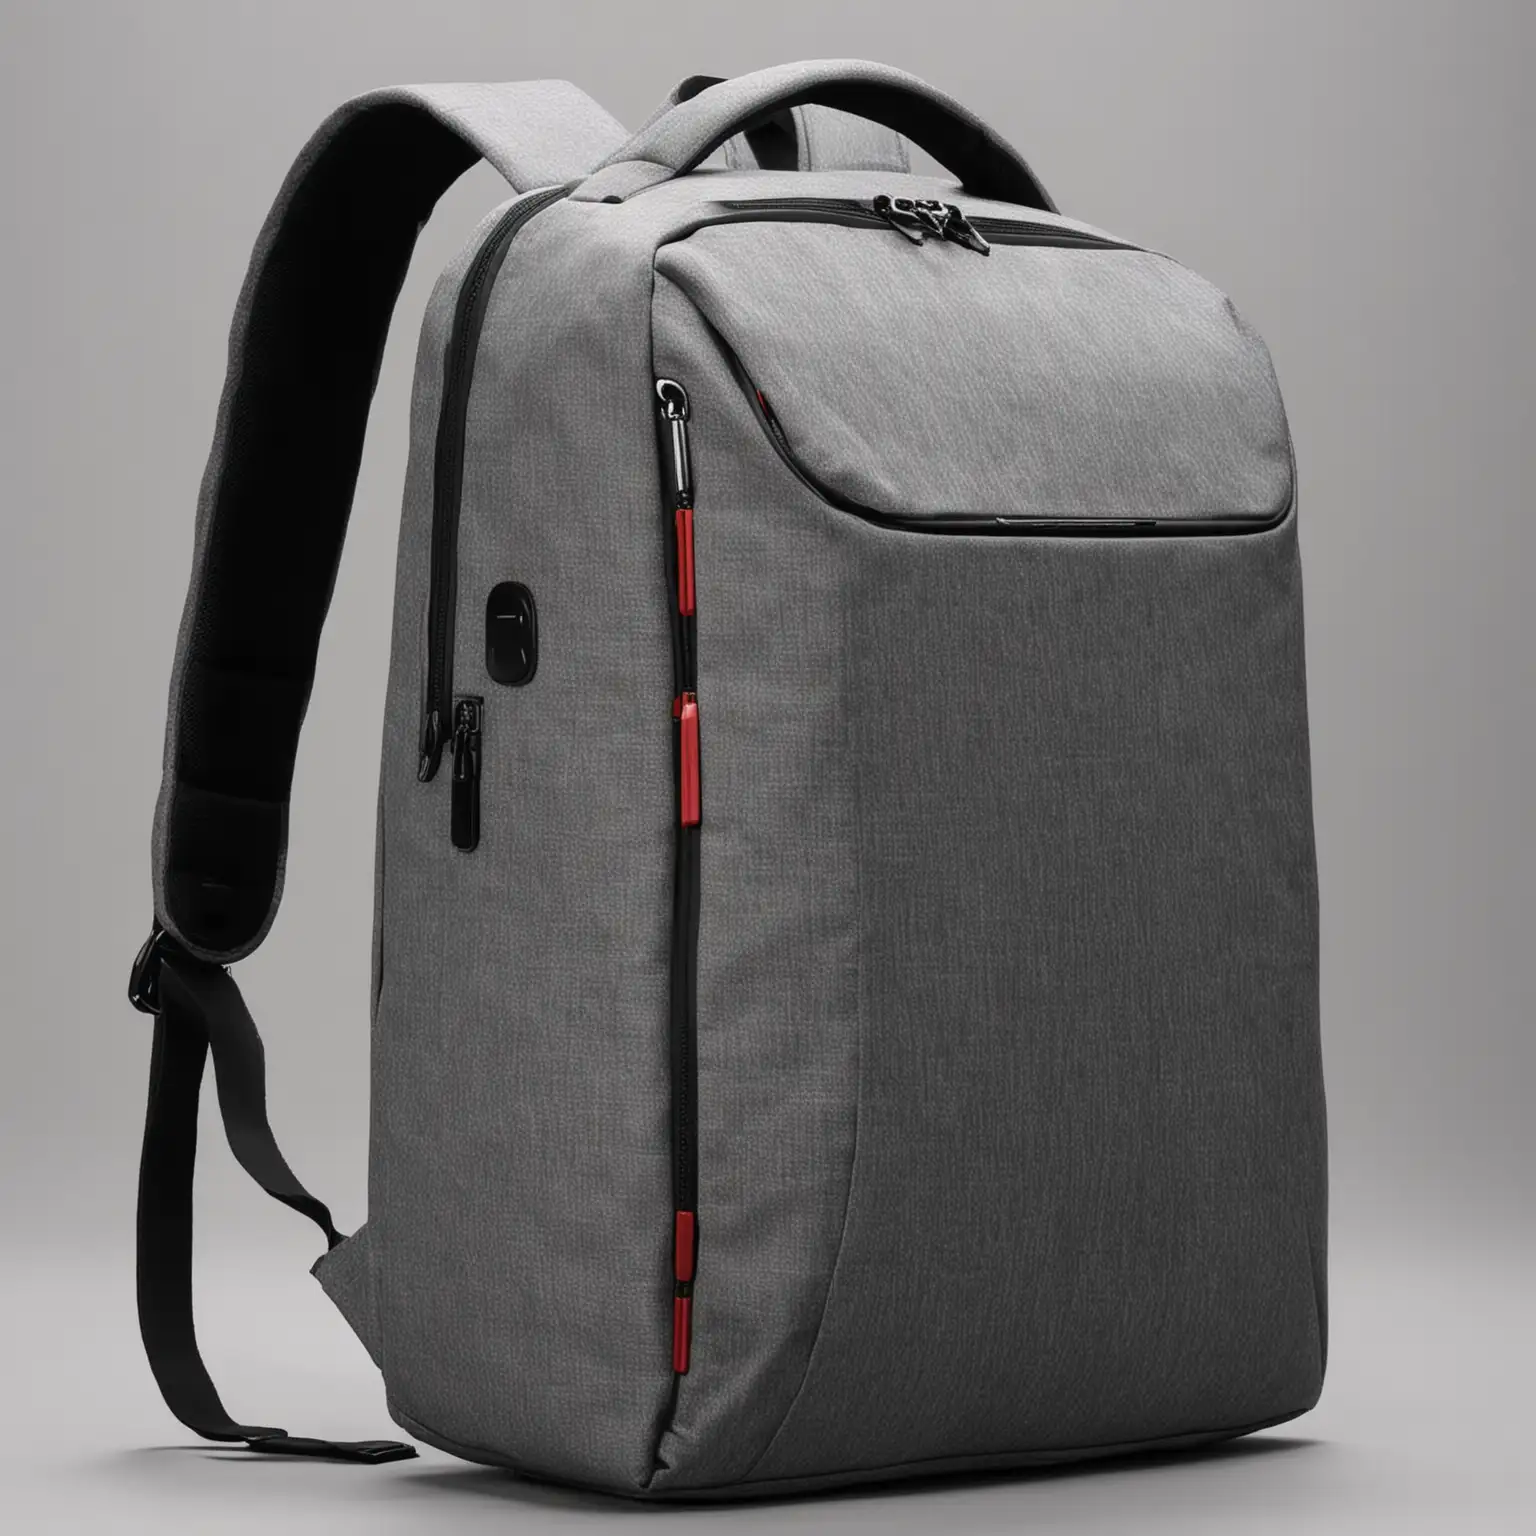 Business Travel Backpack with Modern Features and Stylish Design